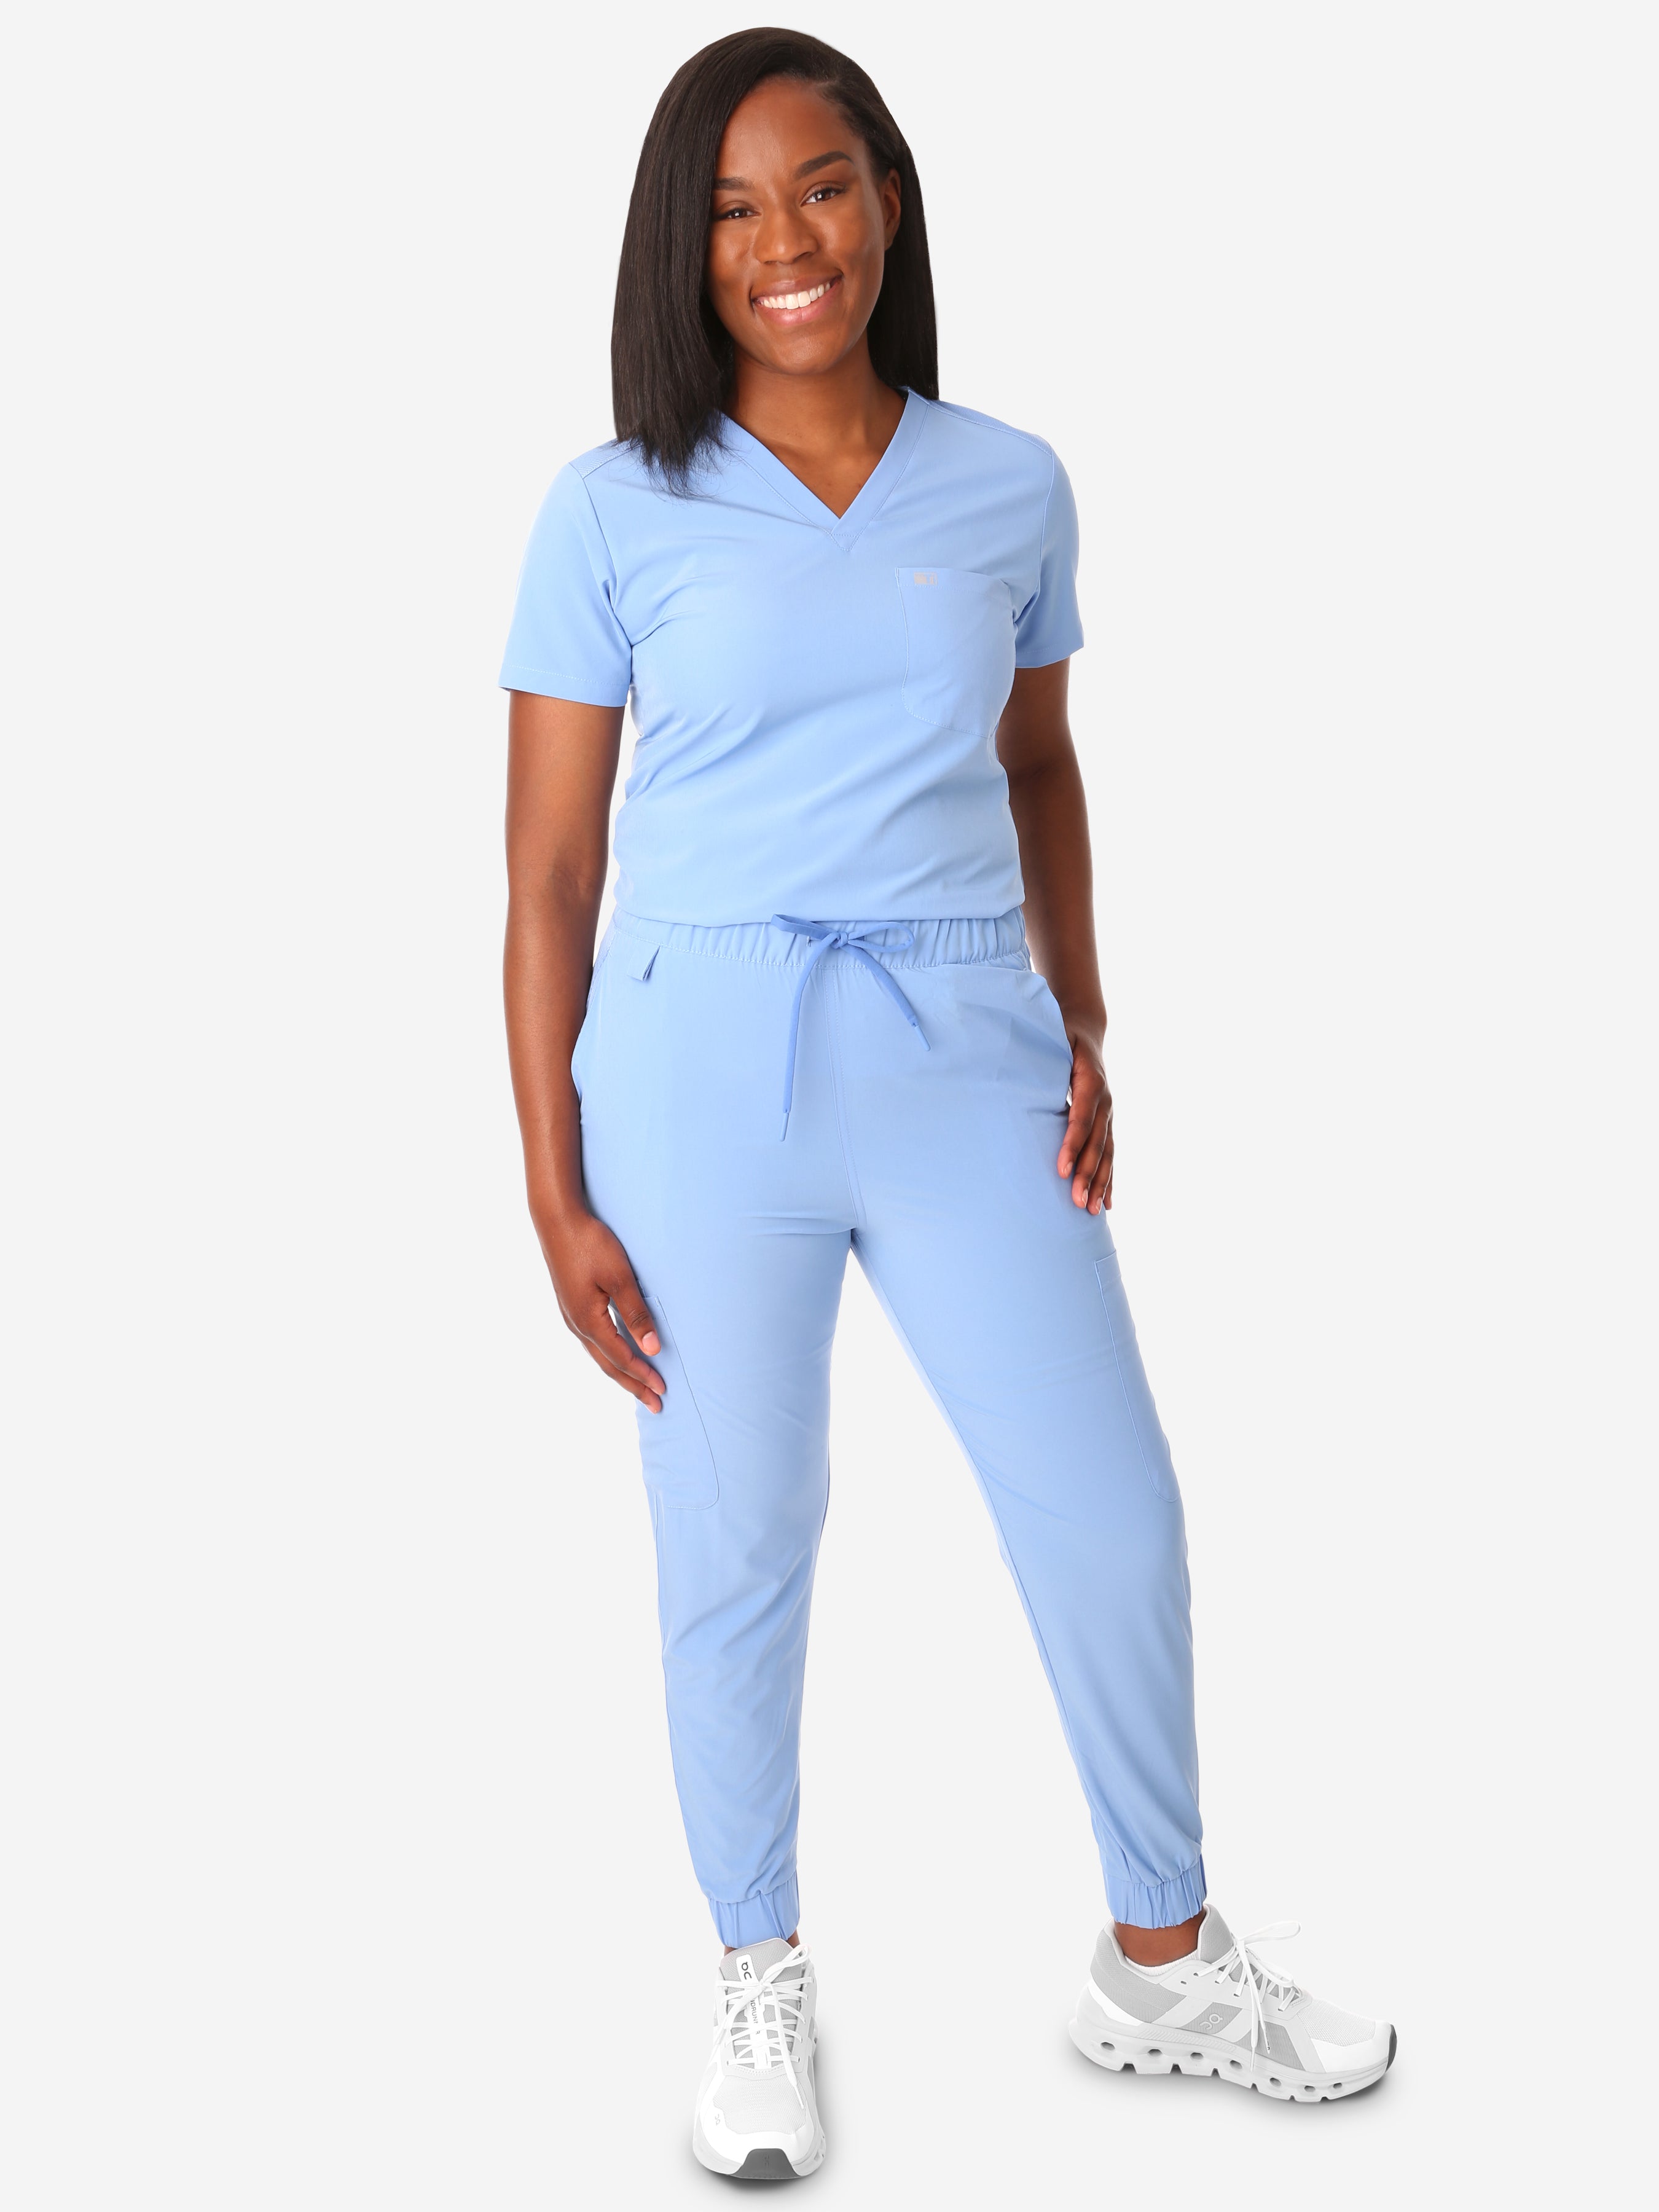 TiScrubs Ceil Blue Women&#39;s Stretch Perfect Jogger Pants and One-Pocket Tuckable Top Front View Full Body